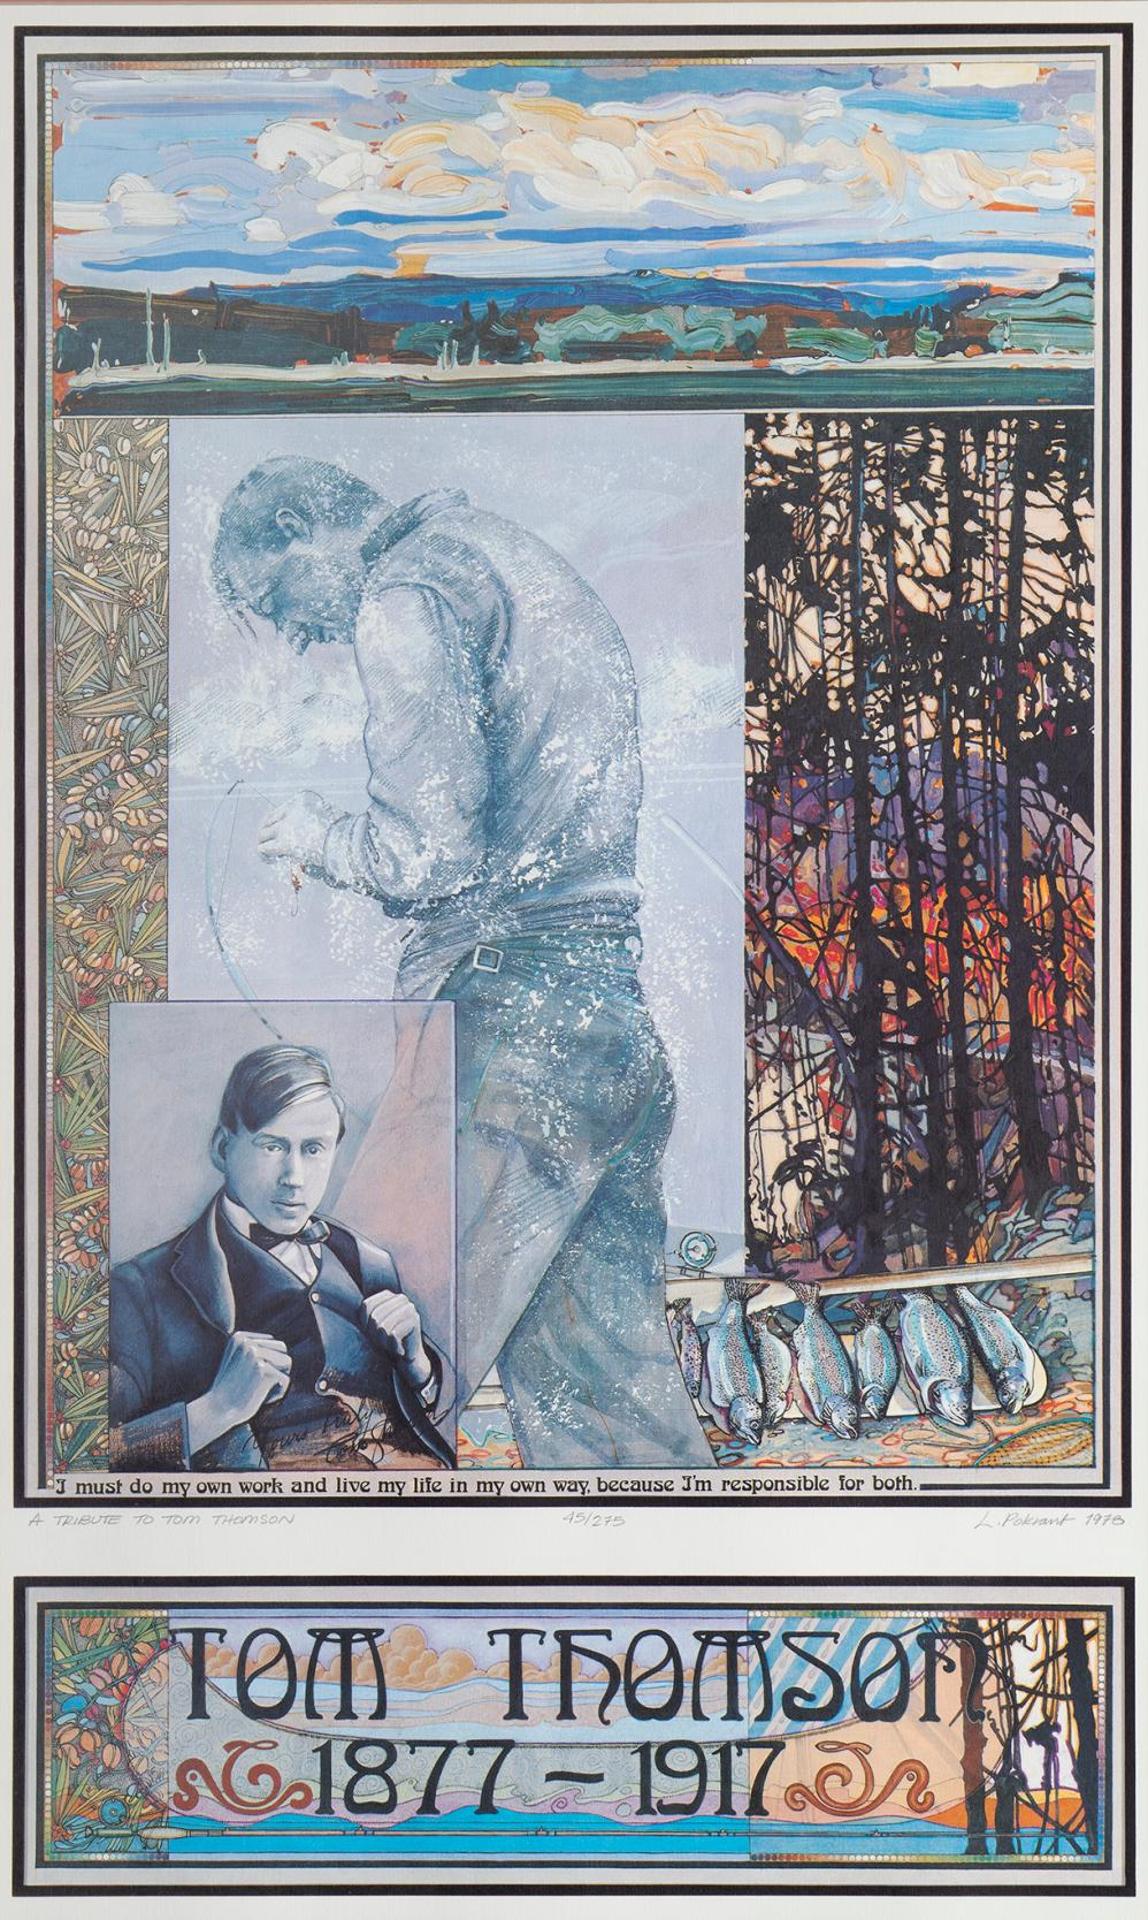 Luther Pokrant (1947) - A Tribute to Tom Thomson